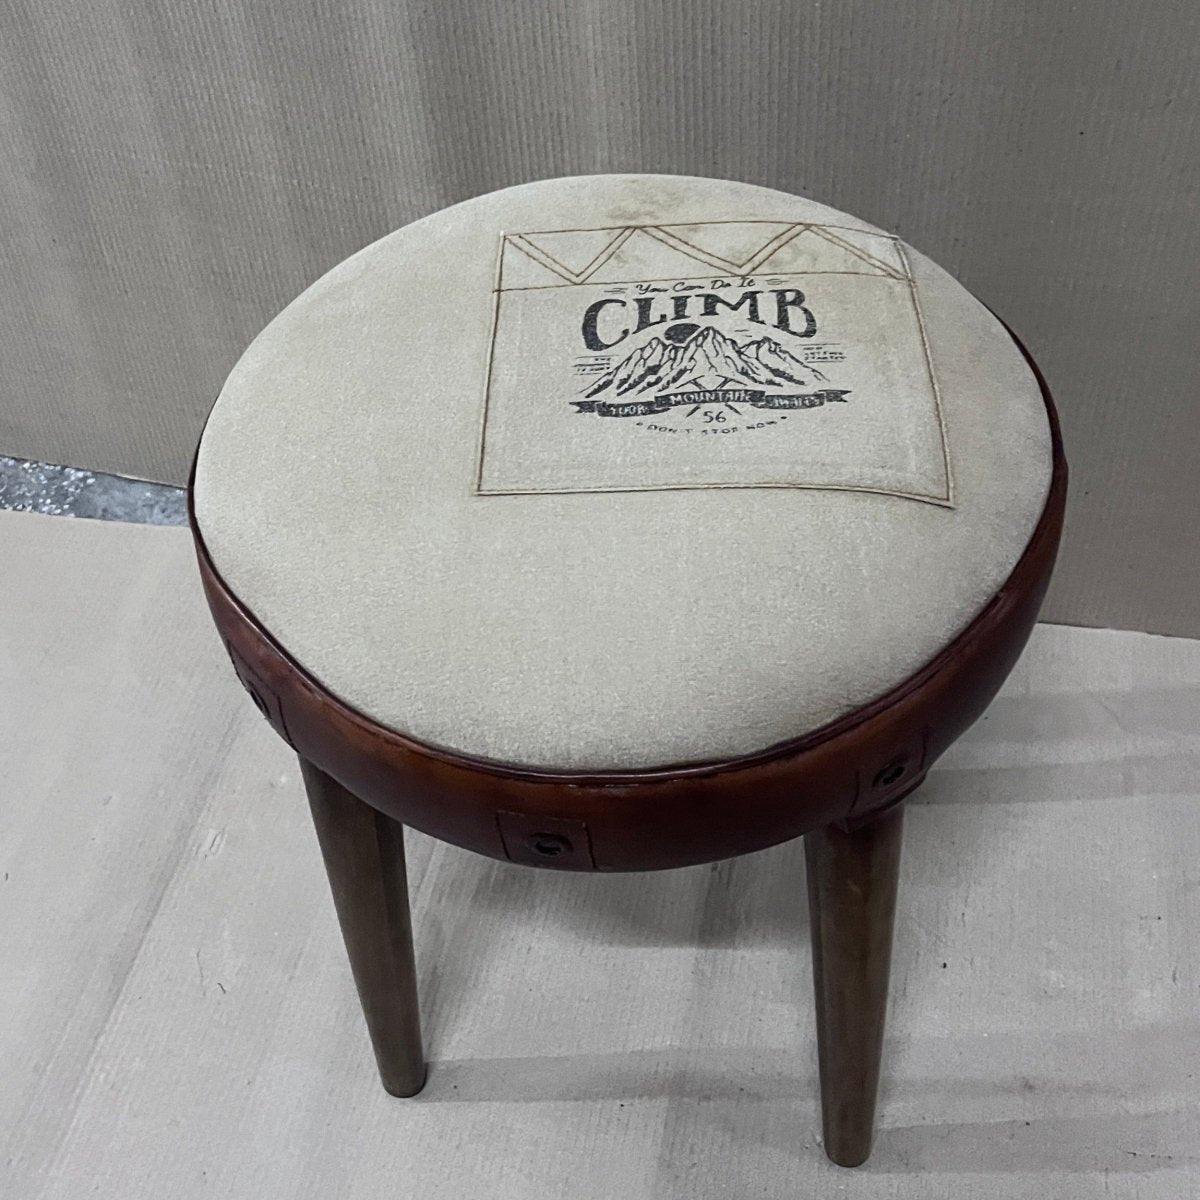 Climb Leather and canvas 4 leg stool - Rustic Furniture Outlet